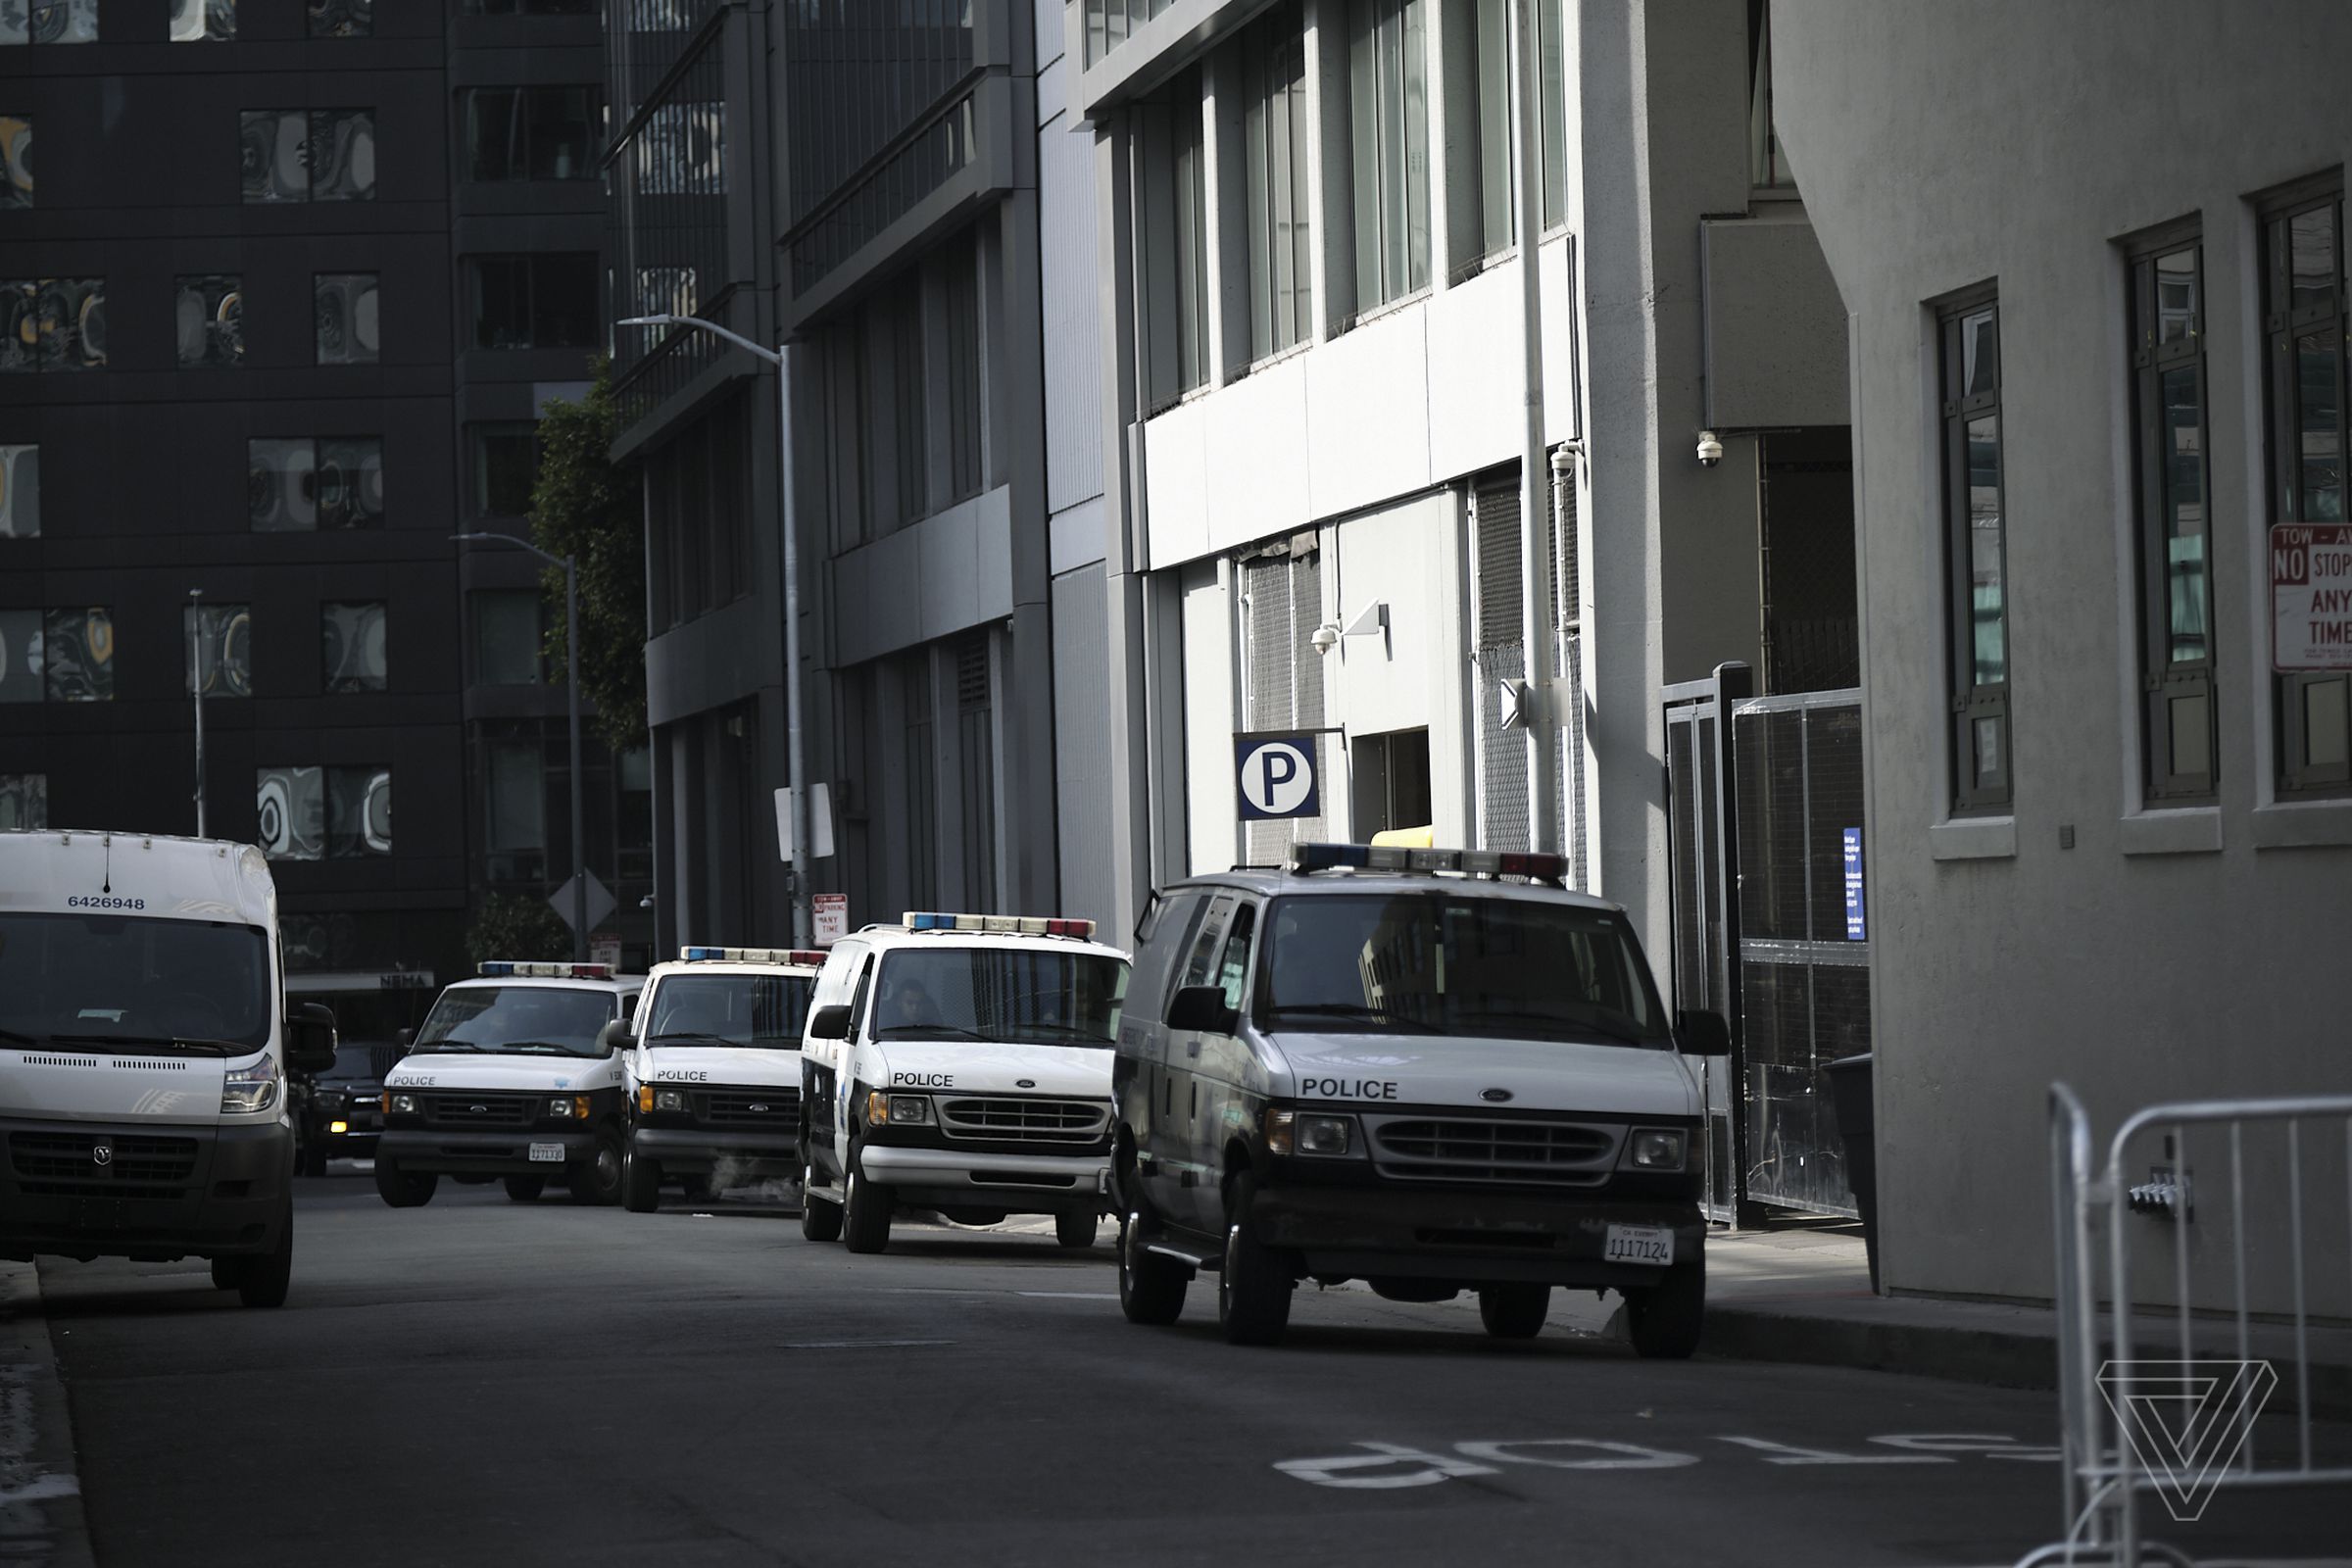 Police vans parked in the alley behind the Twitter headquarters.